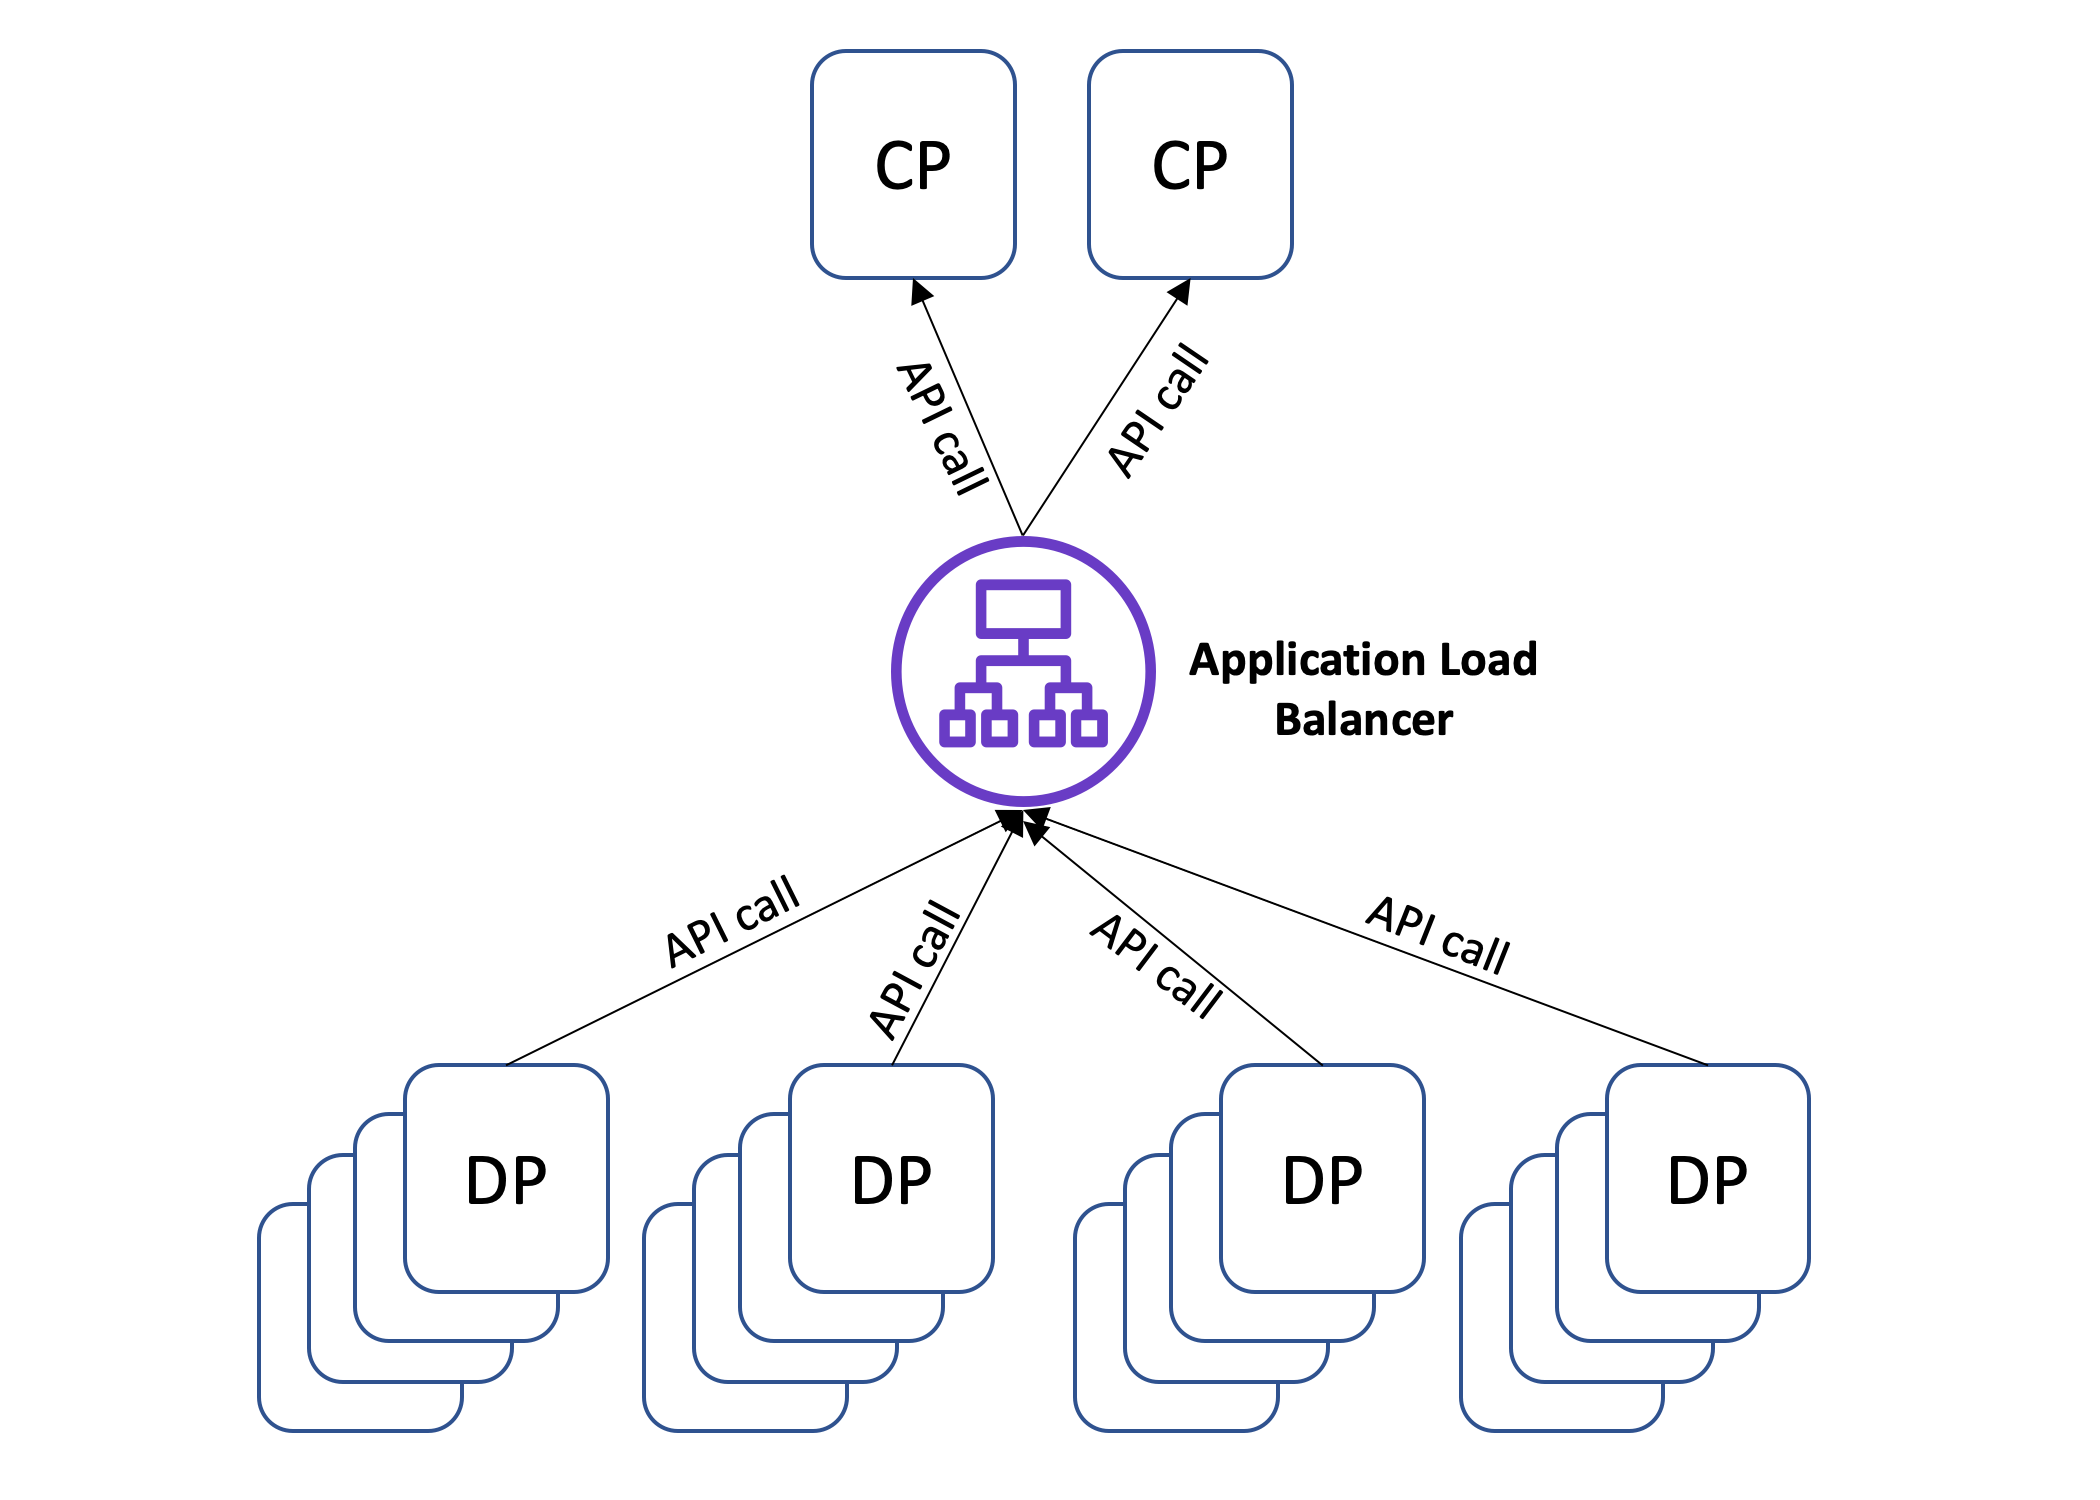 Article: Avoiding overload in distributed systems by putting the smaller service in control